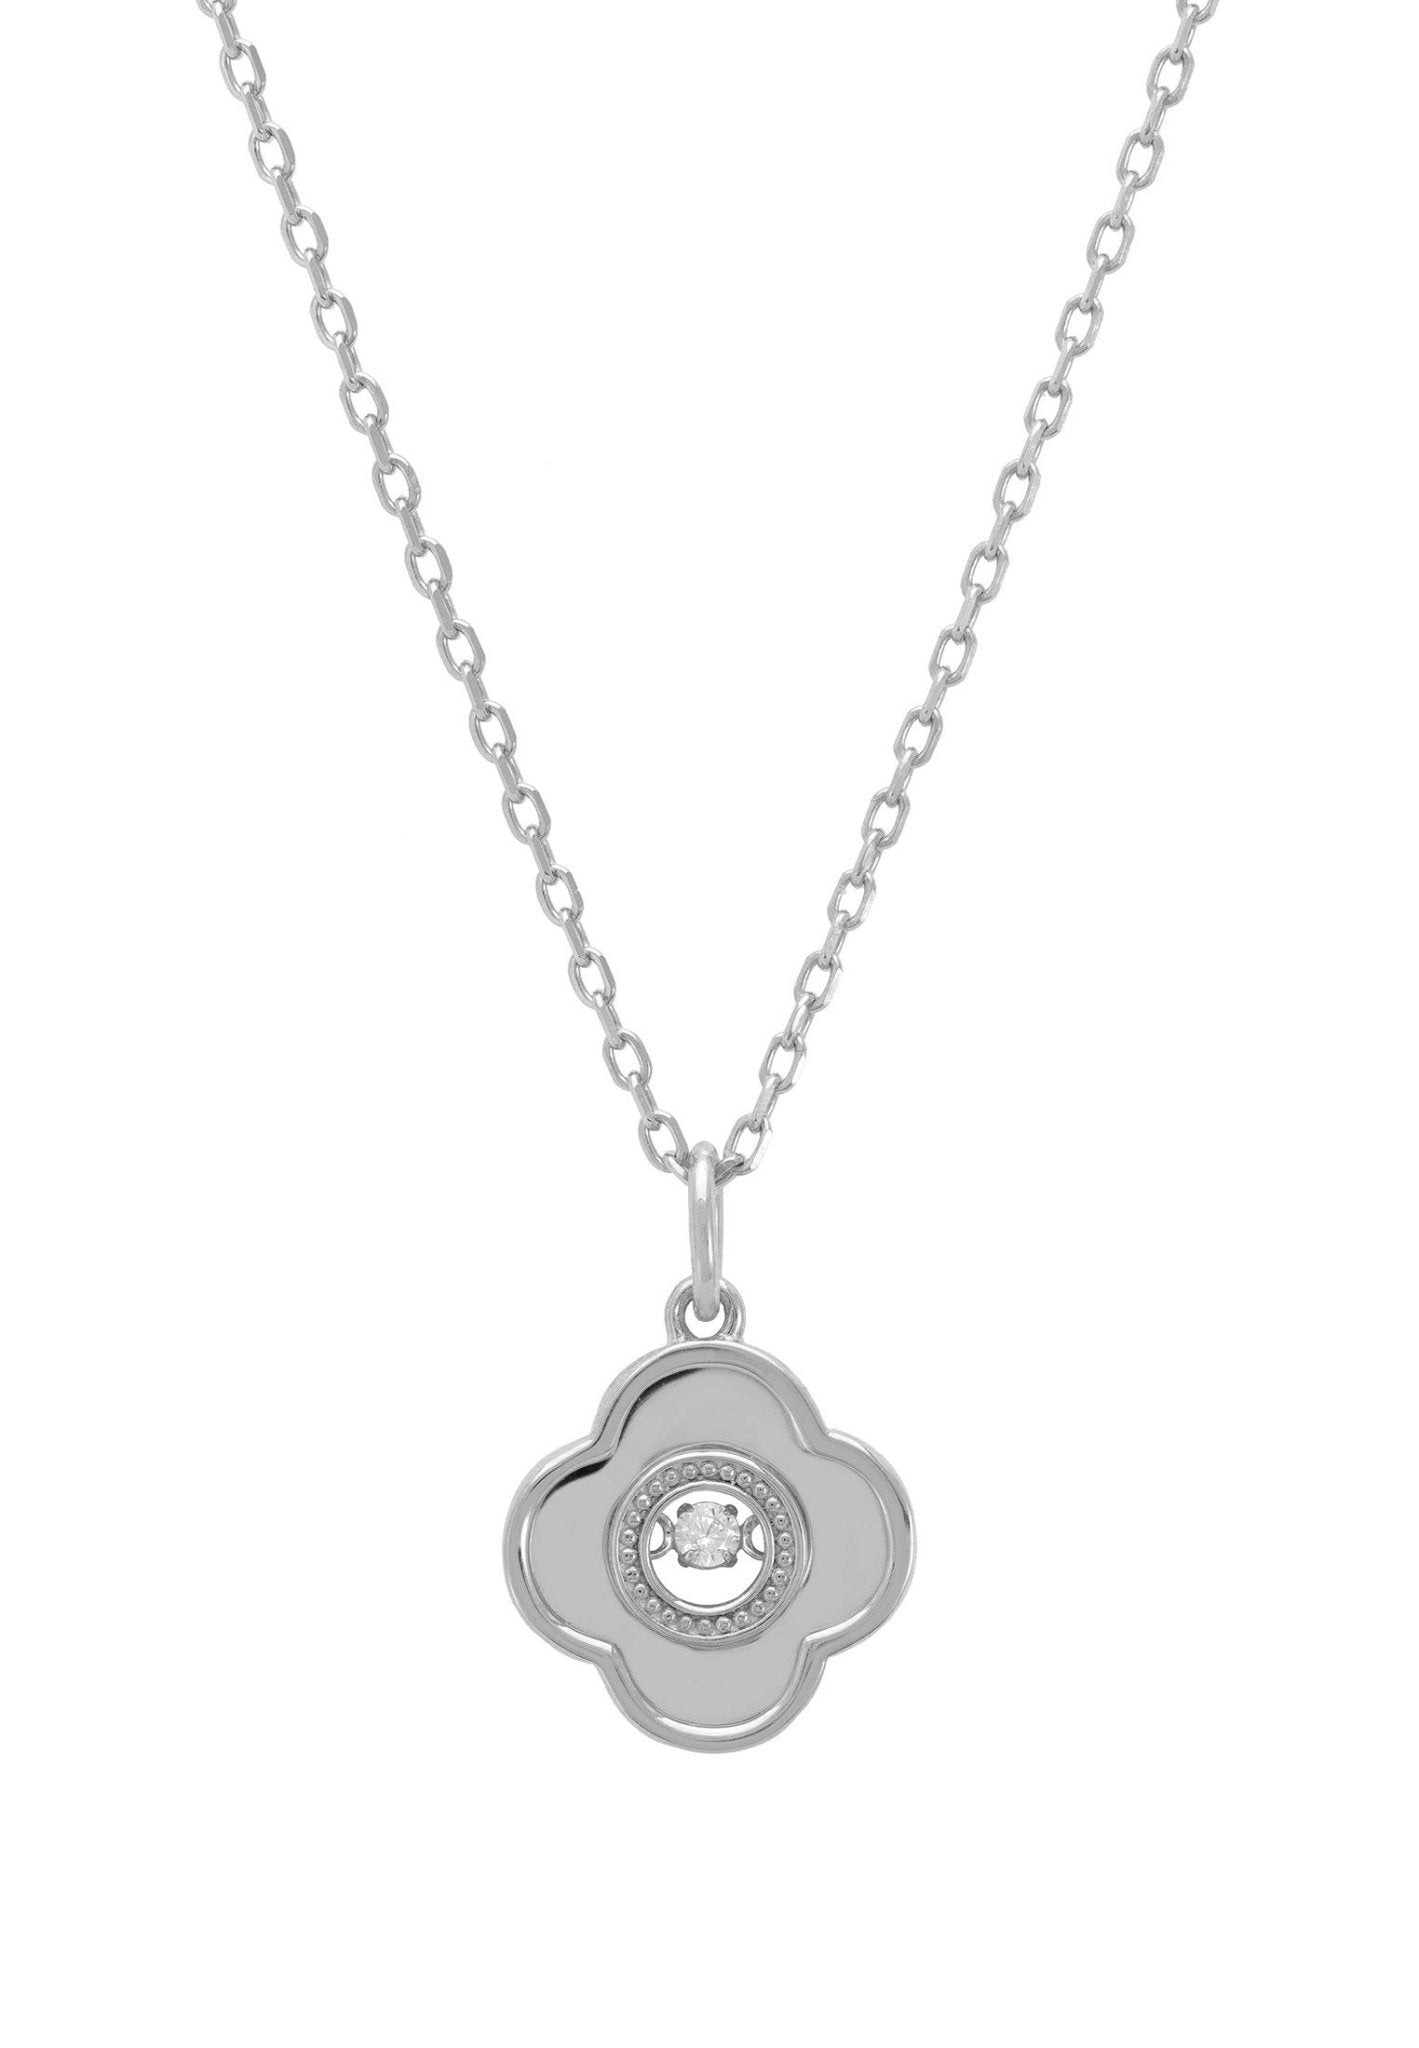 Clover Floating Stone Necklace Silver - LATELITA Necklaces